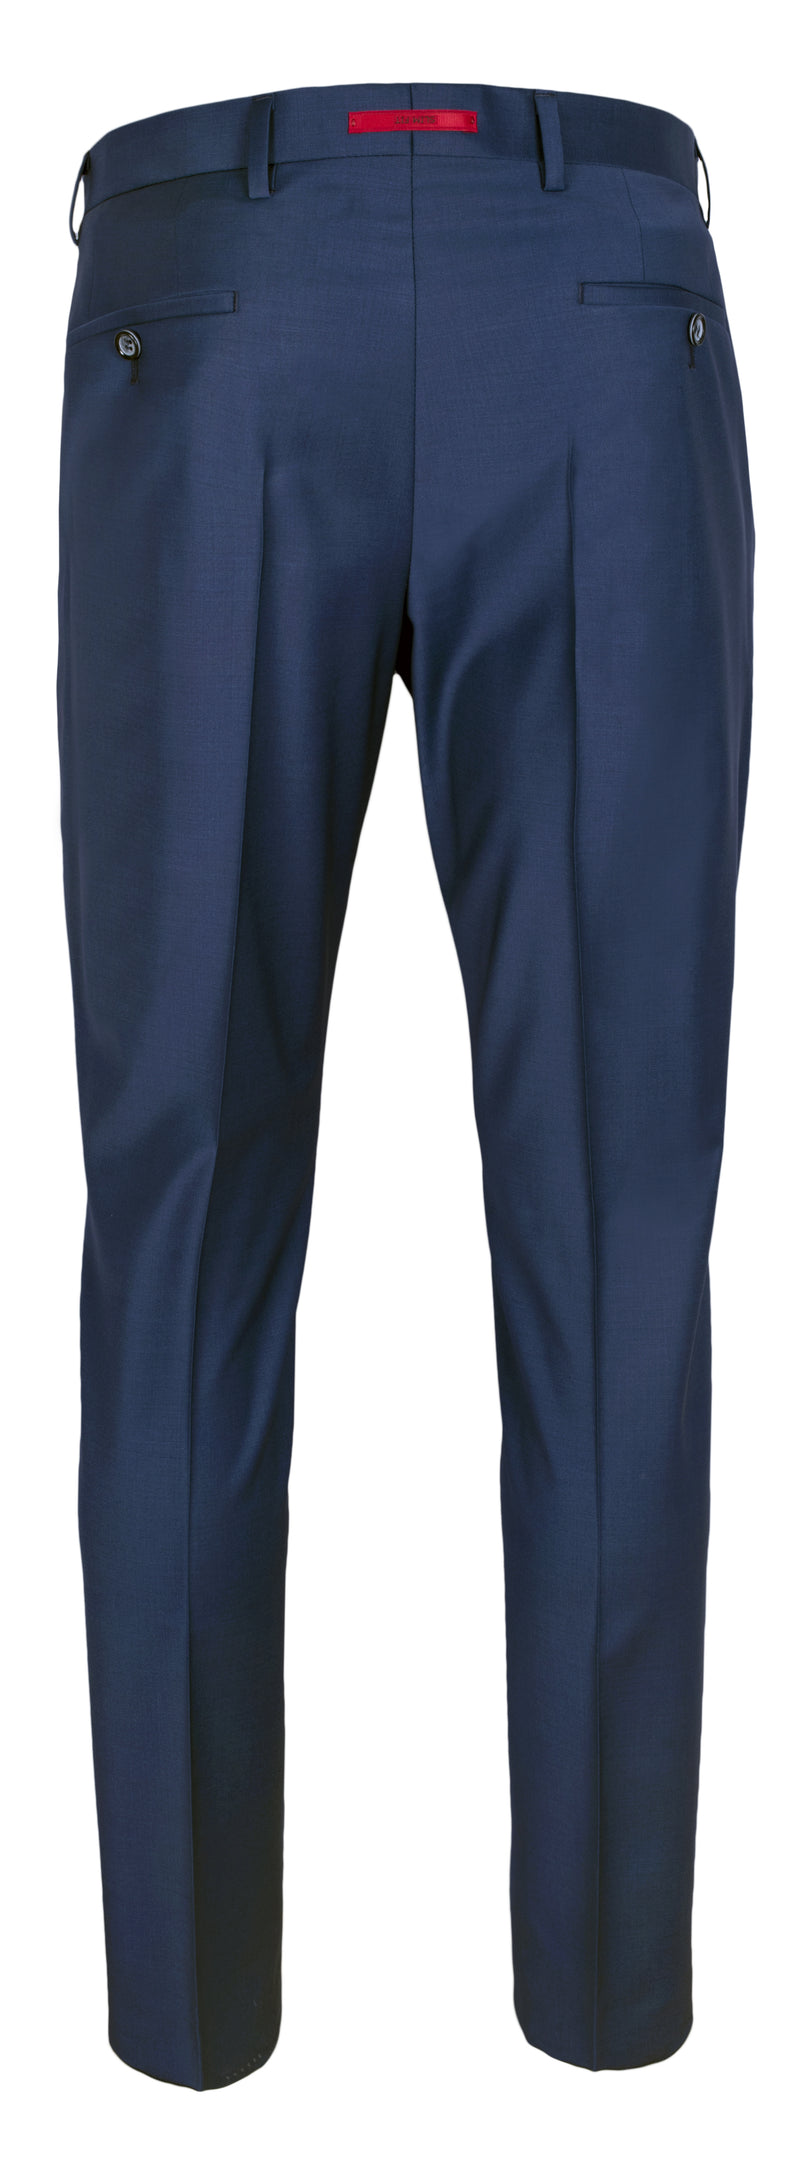 Roy Robson Suit Pants